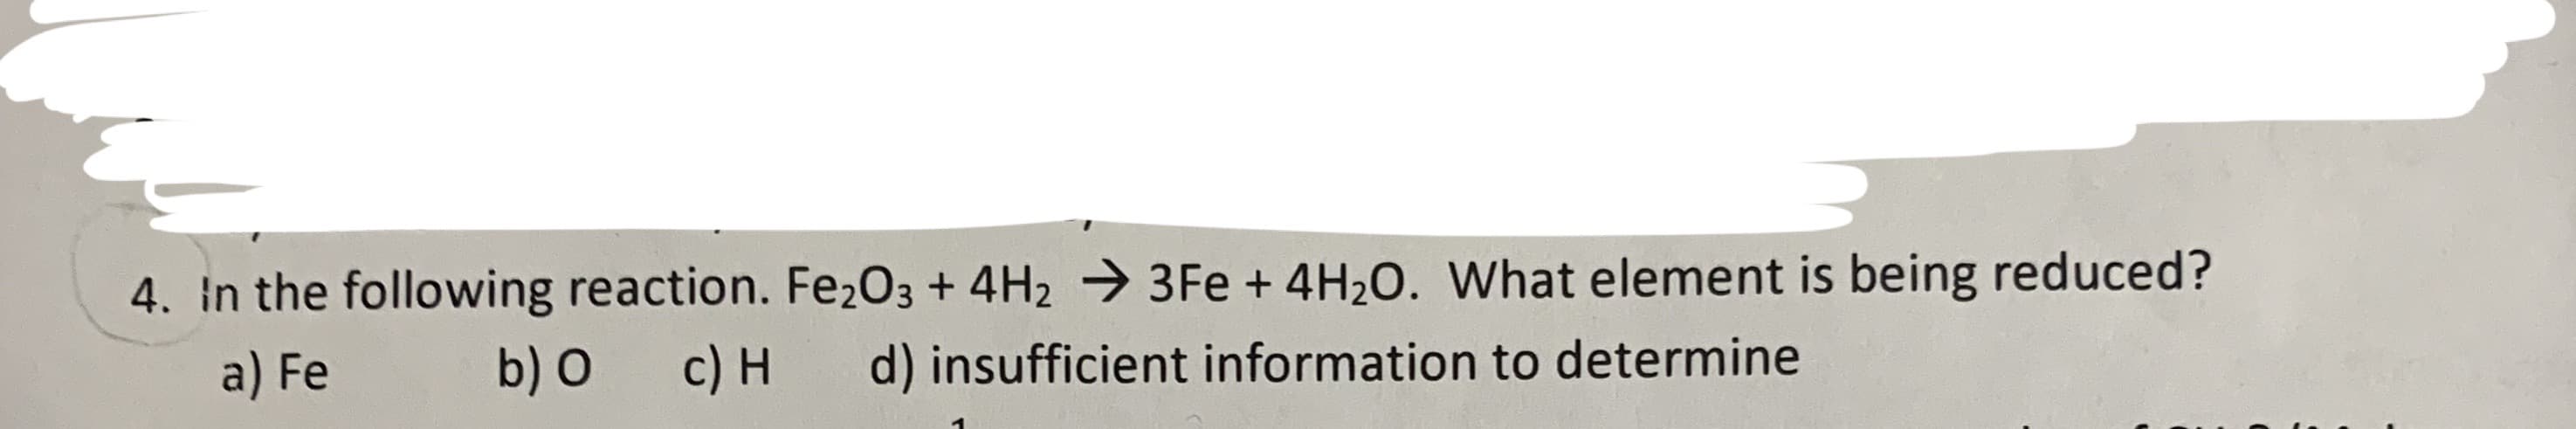 4. In the following reaction. Fe2O3 + 4H2
3 Fe + 4H20. What element is being reduced?
a) Fe
b) O
c) H
d) insufficient information to determine
